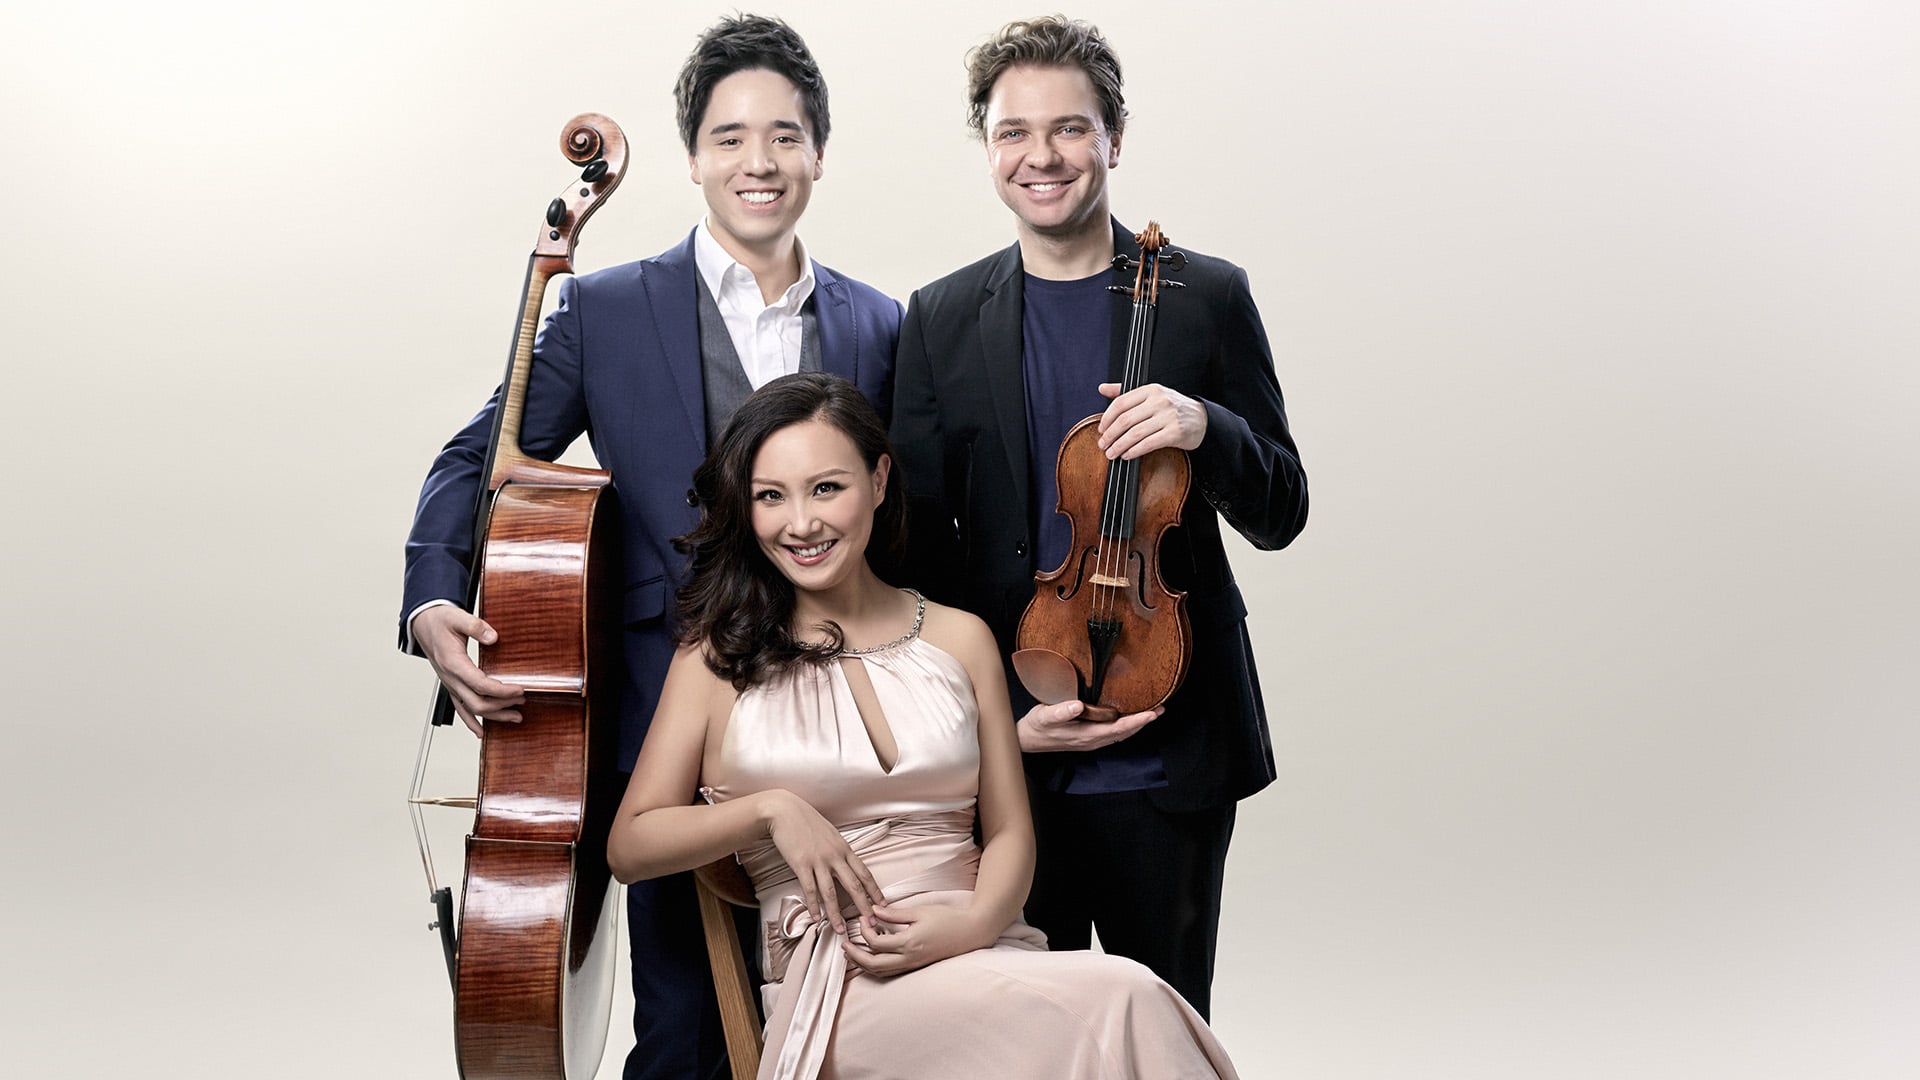 The Sitkovetsky Trio. Two stood wearing blazers, both with short brown hair, one holding a cello, one holding a violin. One sat on a chair in front of them with curly brown shoulder length hair, wearing a formal rose-coloured gown. All smiling.